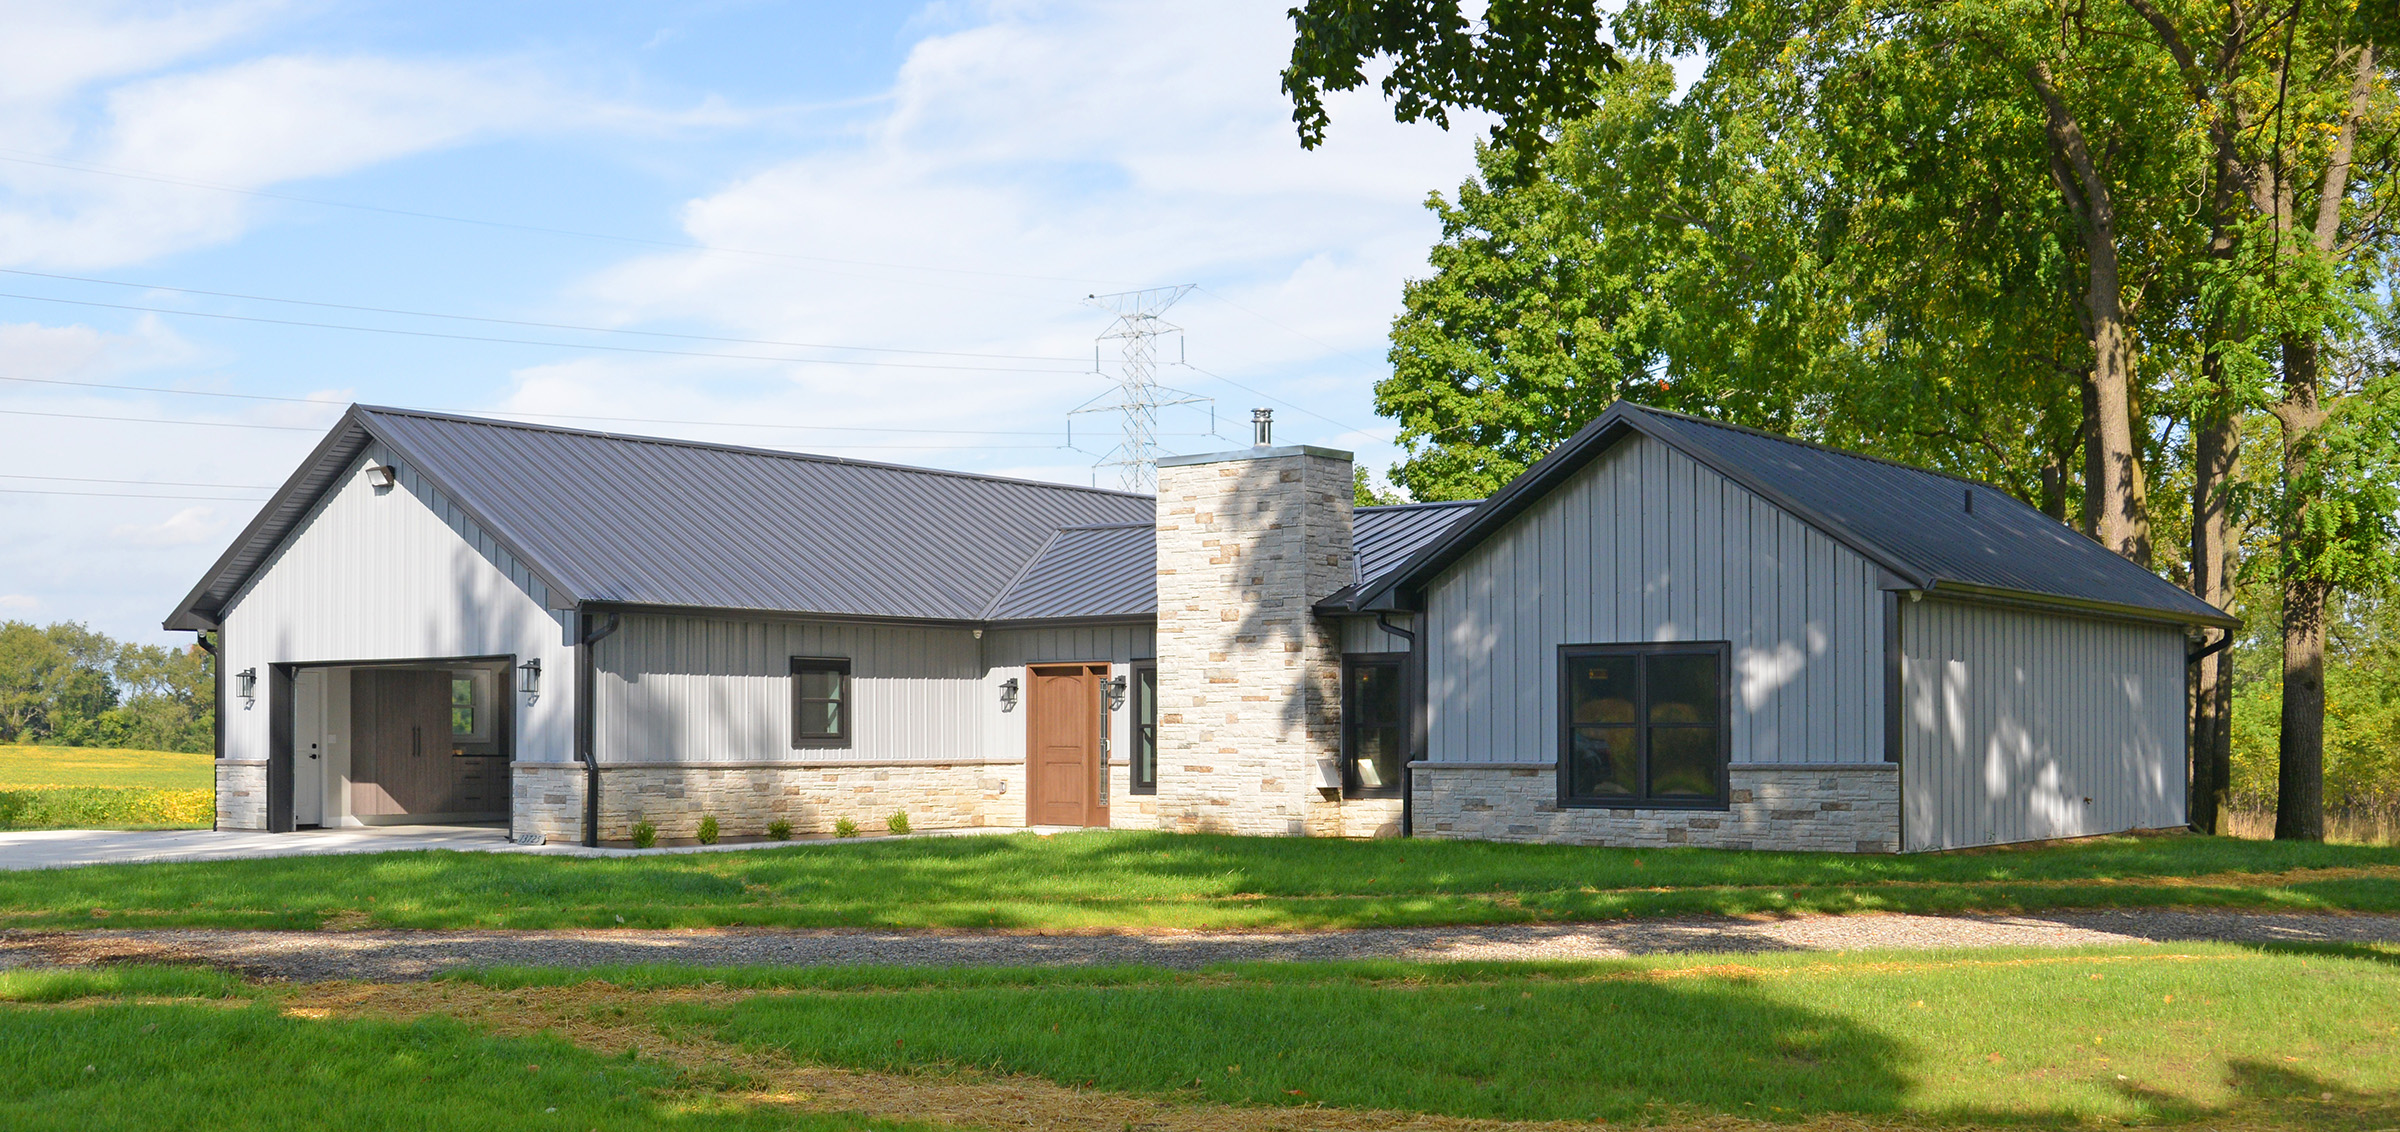 Residential Poole Barn Building Design and Construction